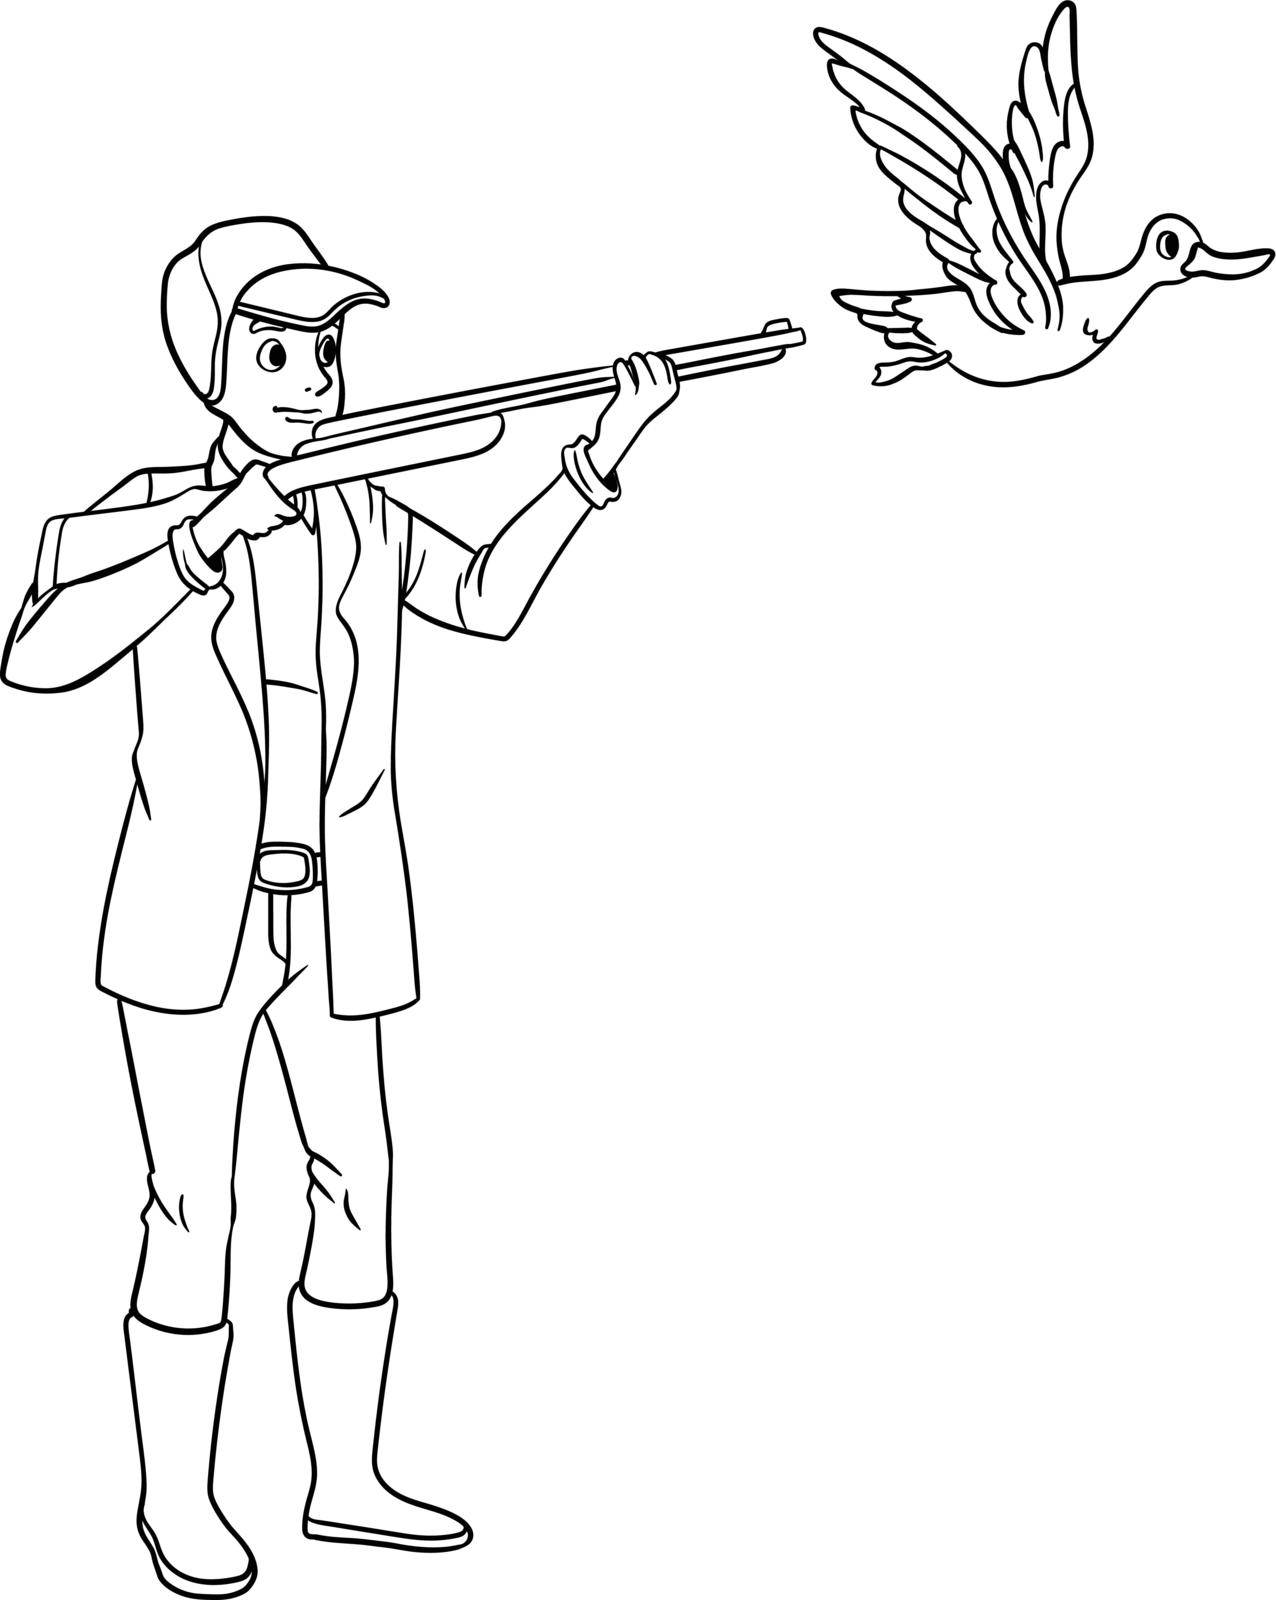 A cute and funny coloring page of a Duck Hunting. Provides hours of coloring fun for children. Color, this page is very easy. Suitable for little kids and toddlers.